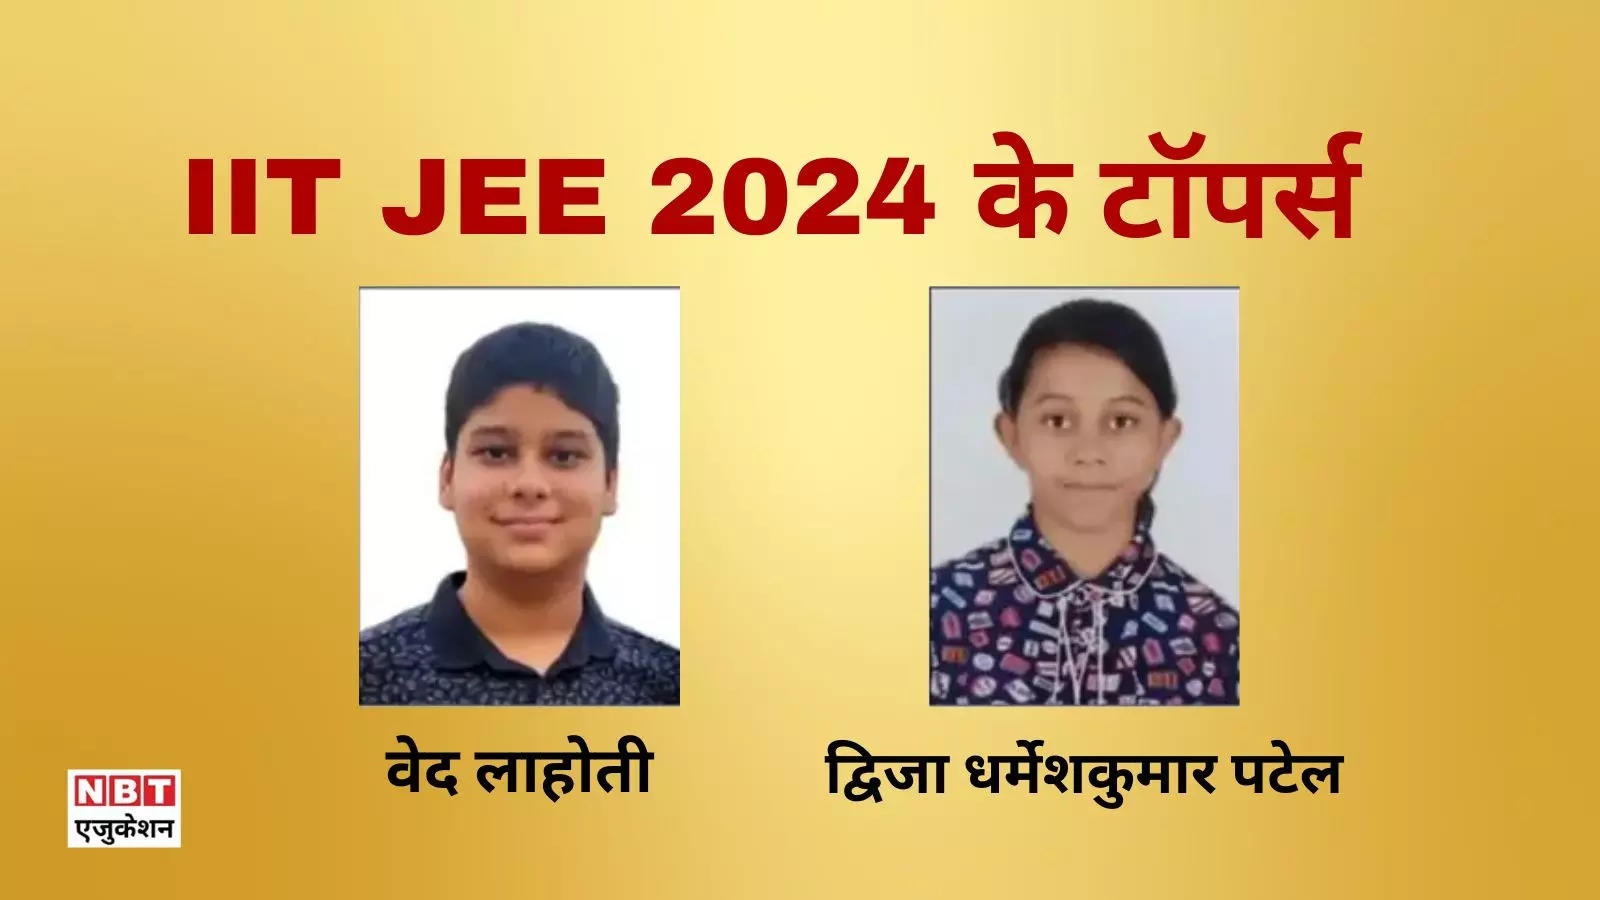 IIT JEE Topper List 2024: Ved Lahoti of Delhi AIR 1, one girl in top 10, this is the JEE Advanced topper list